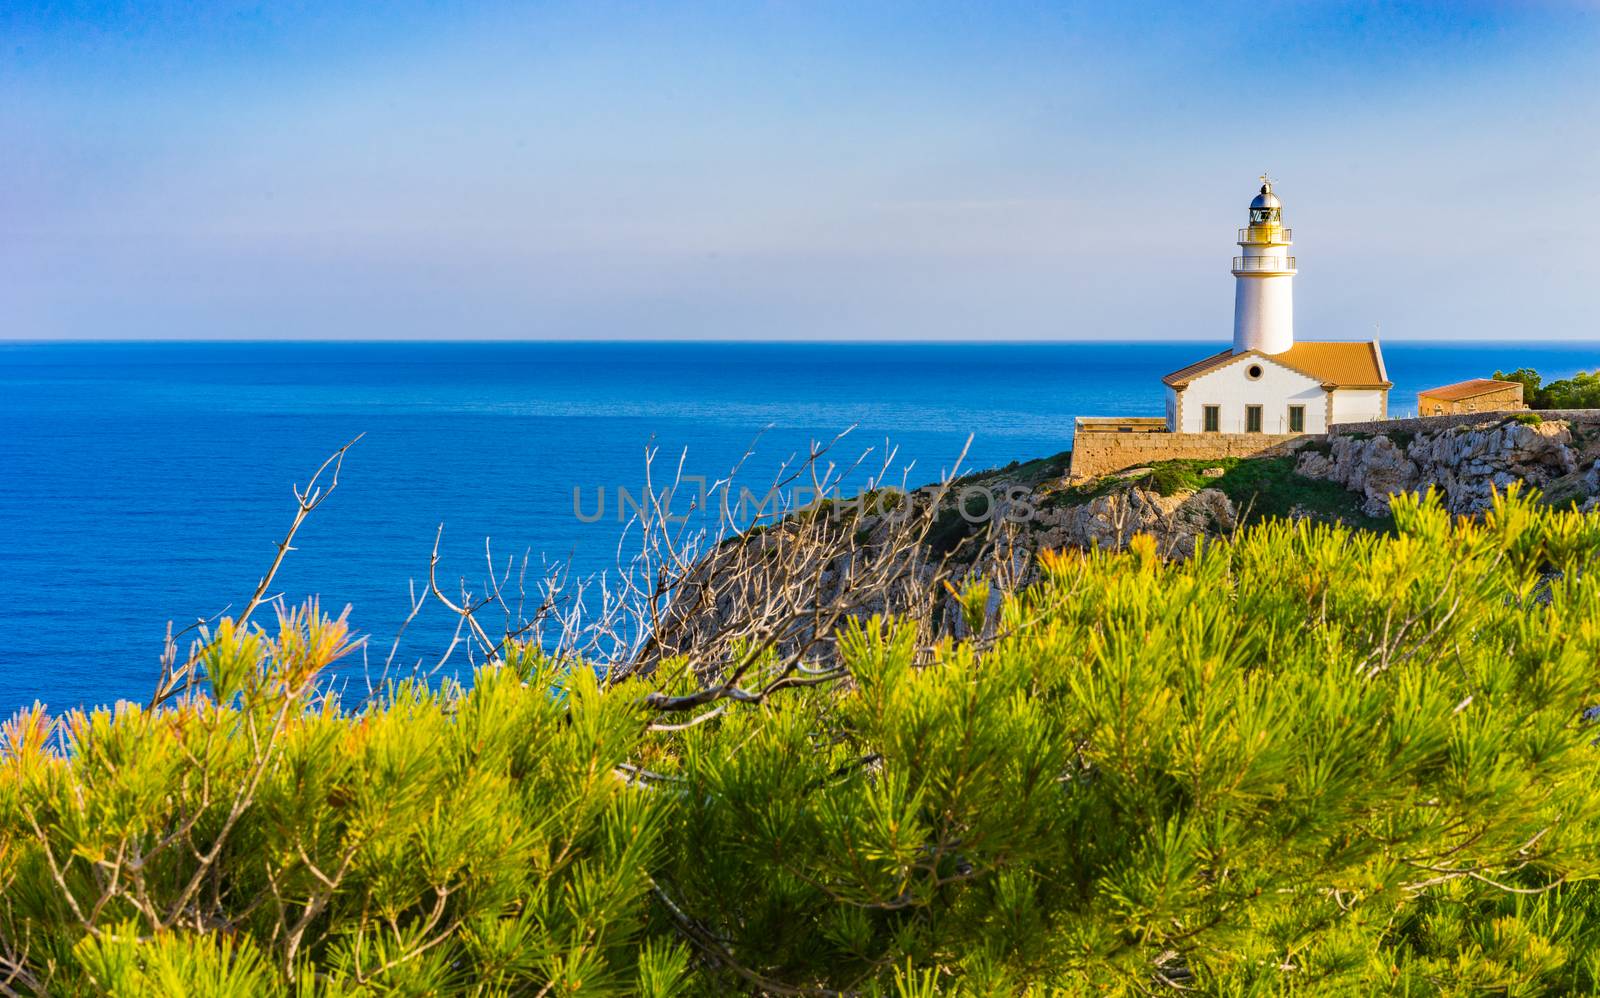 Maritime view with light house at the cape in Cala Rajada on Mallorca, Spain Mediterranean Sea